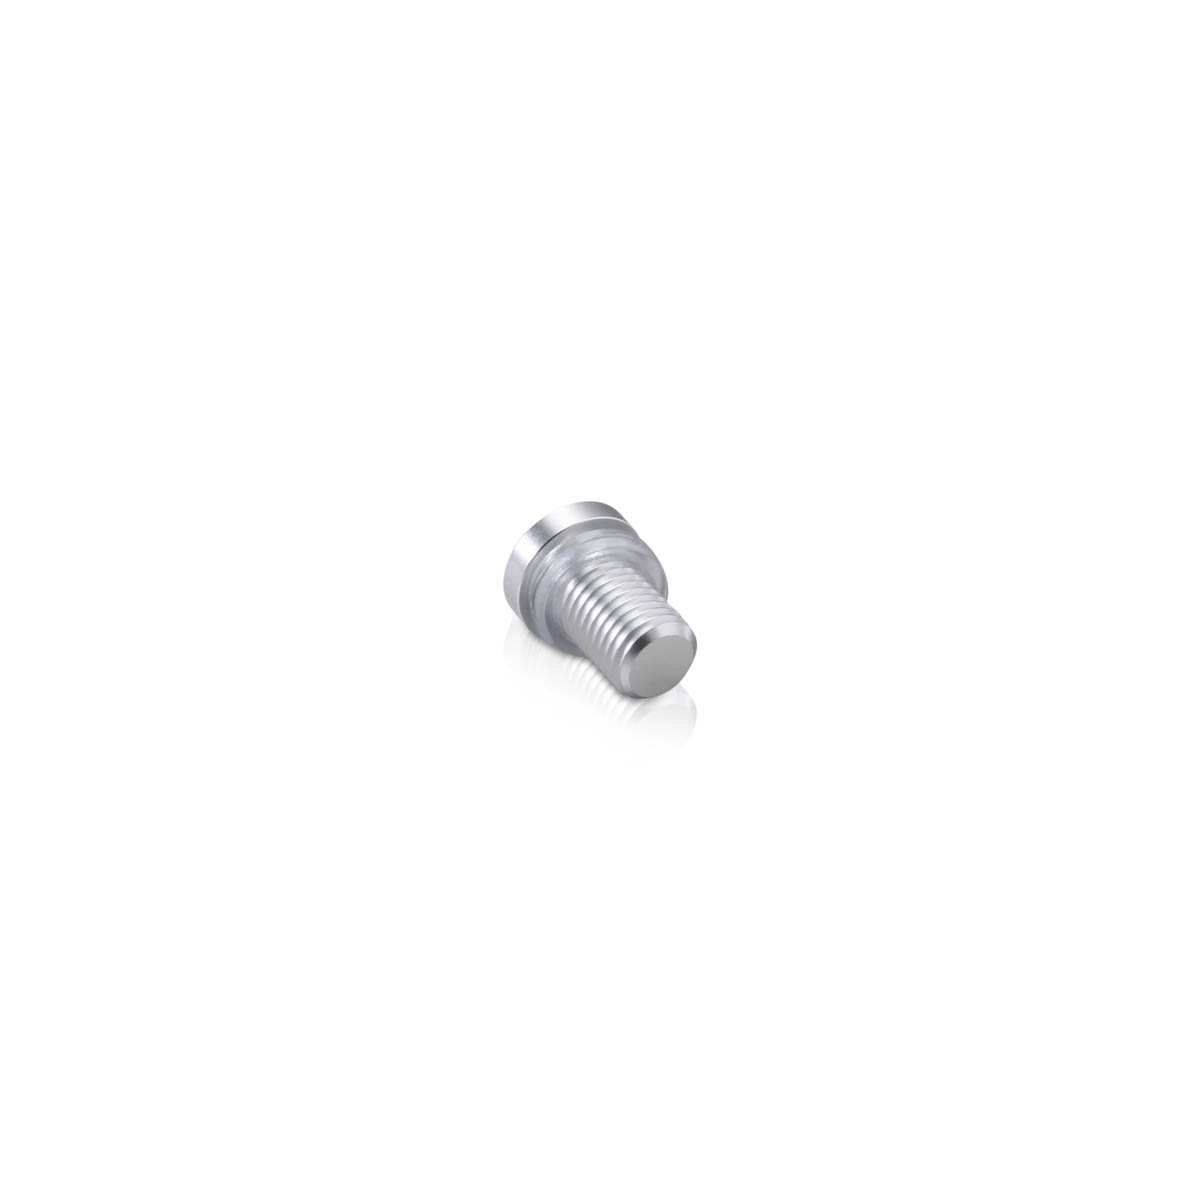 AL12-12A Head replacement for Mbs-Standoffs 1/2'' Diameter x 1/2'' Barrel Length, Aluminum Clear Anodized Finish Standoffs (Includes 2 Silicone Washers).